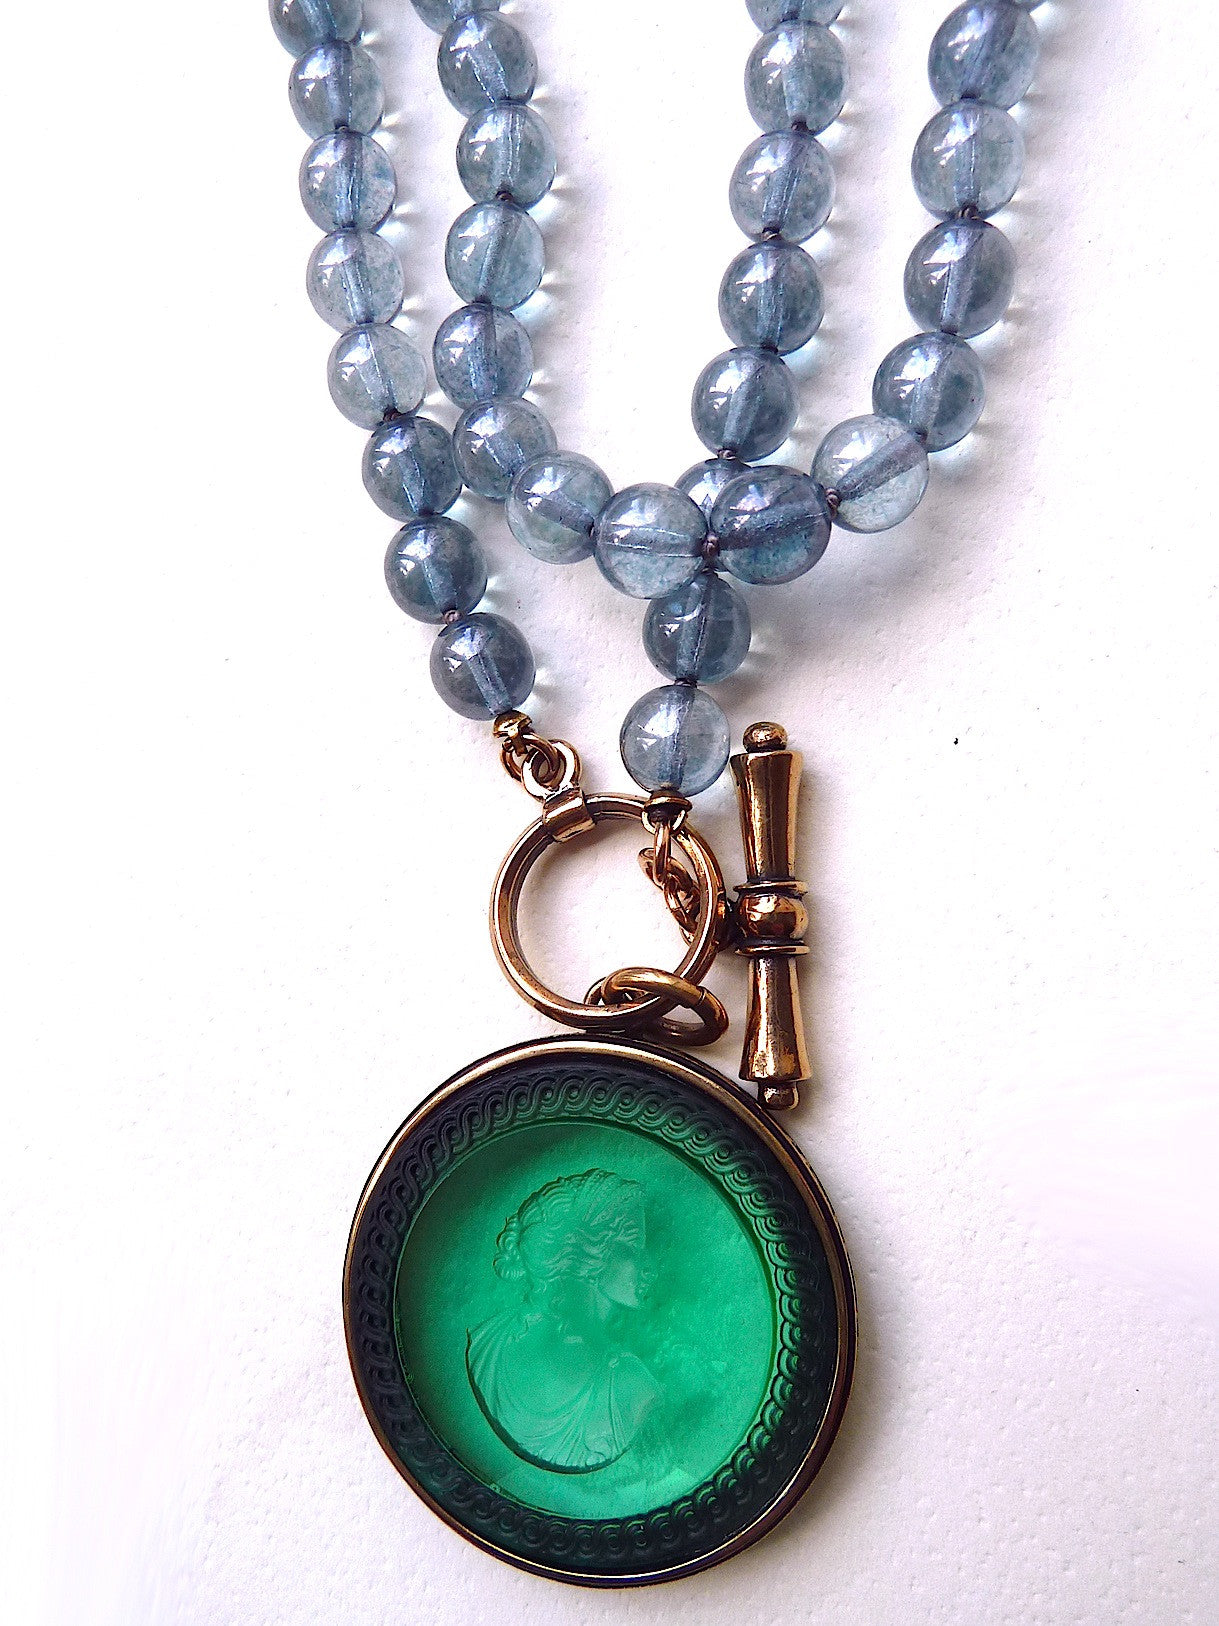 Necklace Intaglio On 30 Inch Glass Bead Deep Green Turquoise